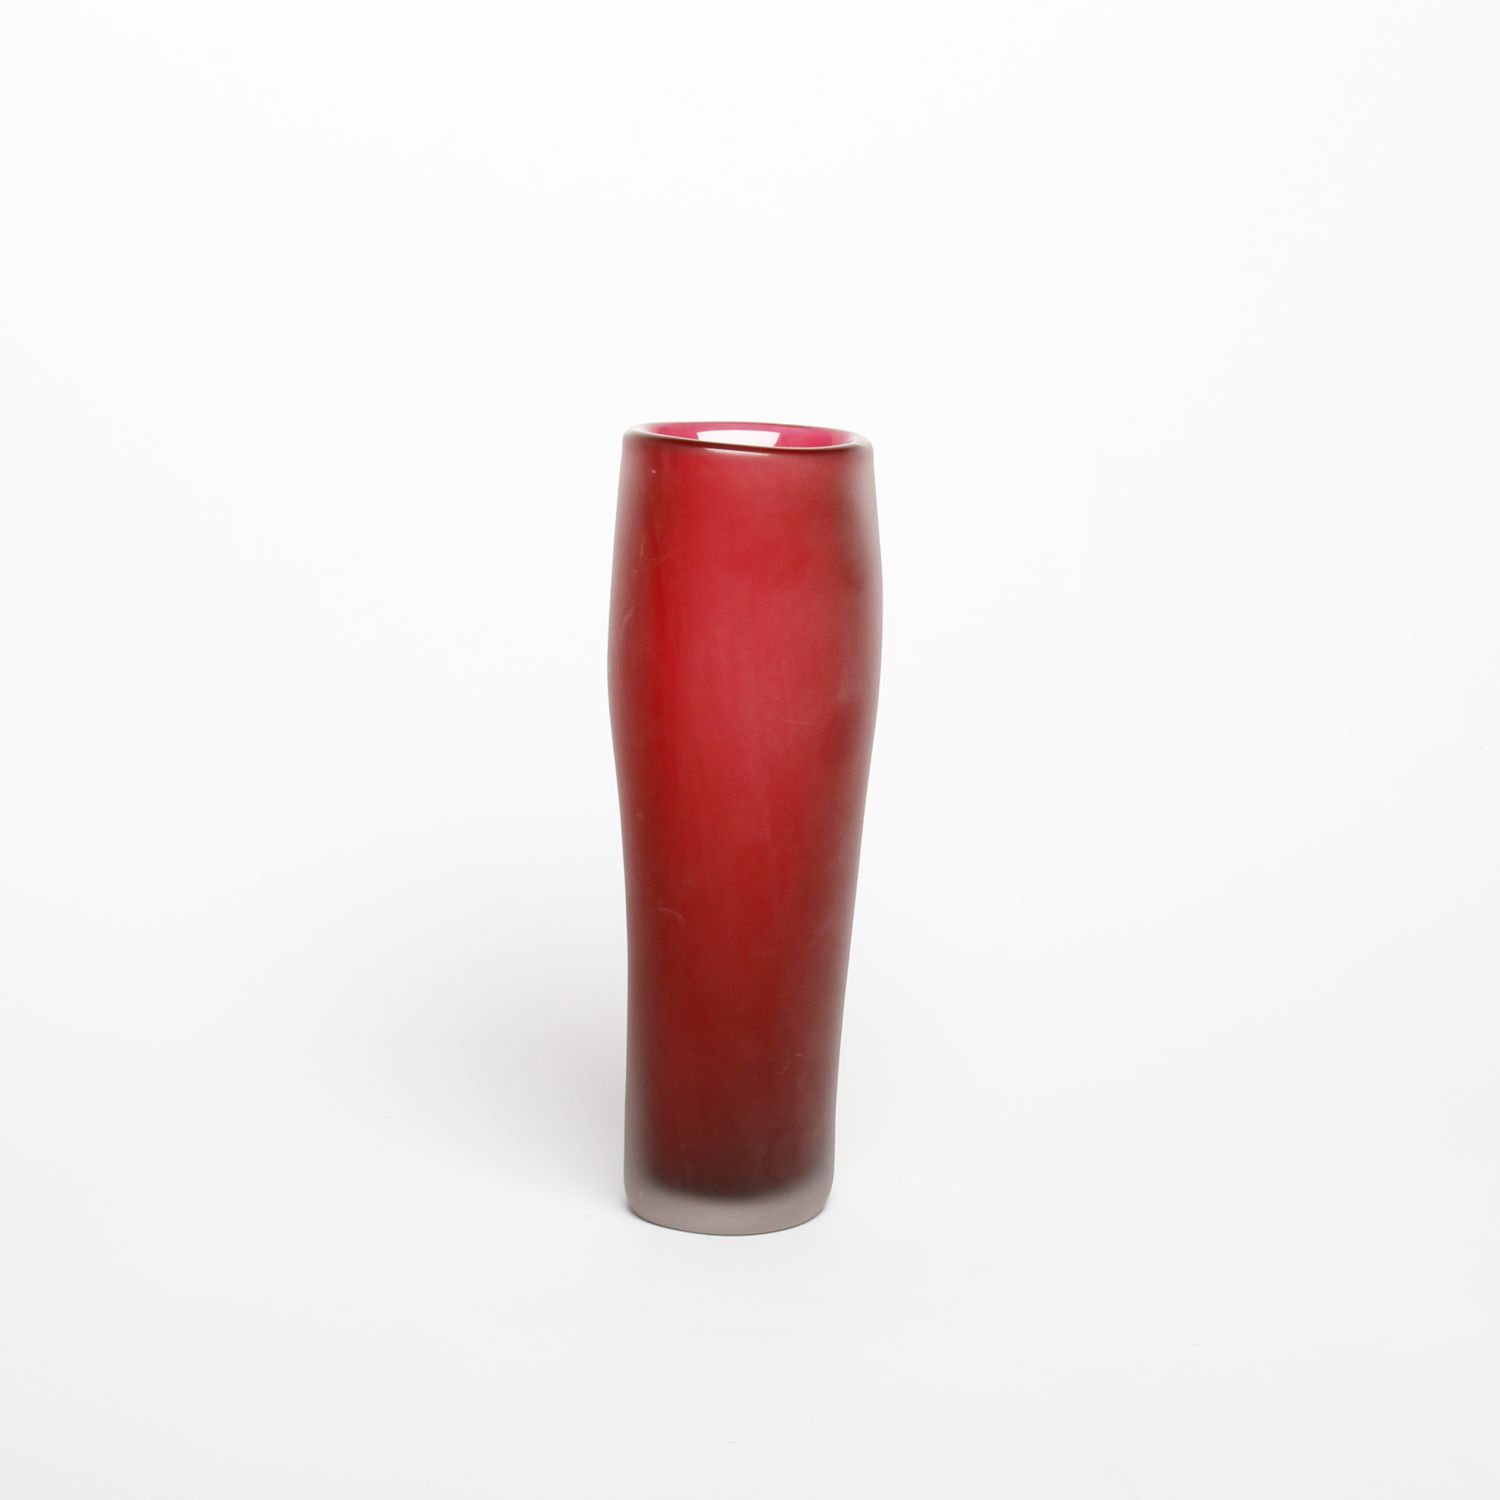 Jill Allan: Large Fat Lipped Vase (Assorted colours) Product Image 1 of 7